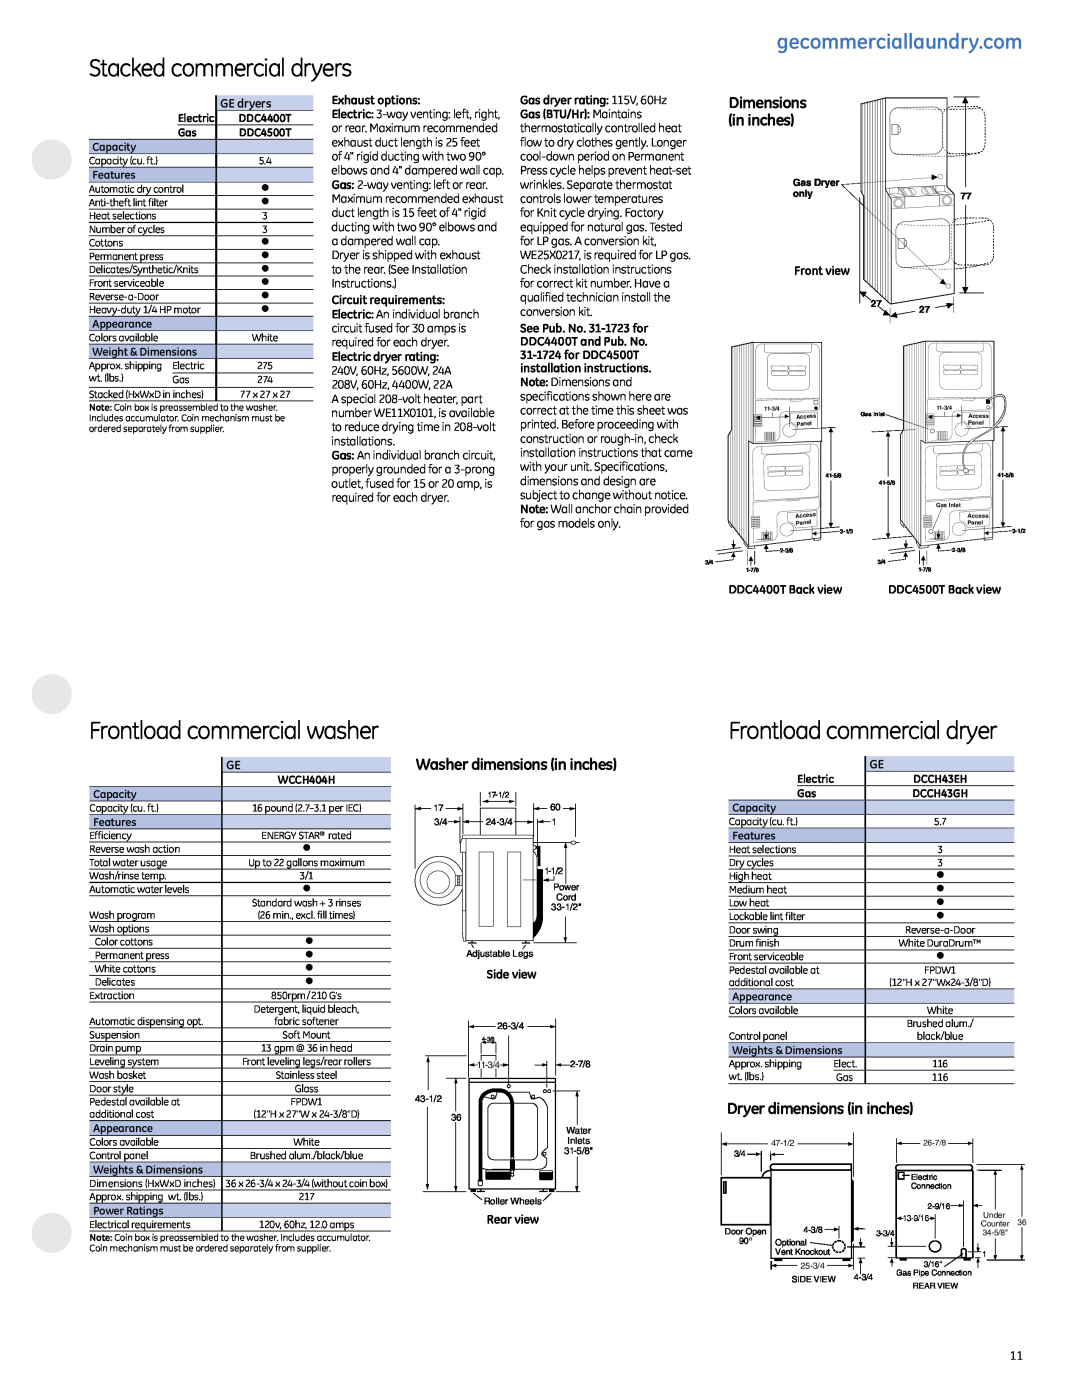 GE Stacked commercial dryers, Frontload commercial dryer, Frontload commercial washer, gecommerciallaundry.com 